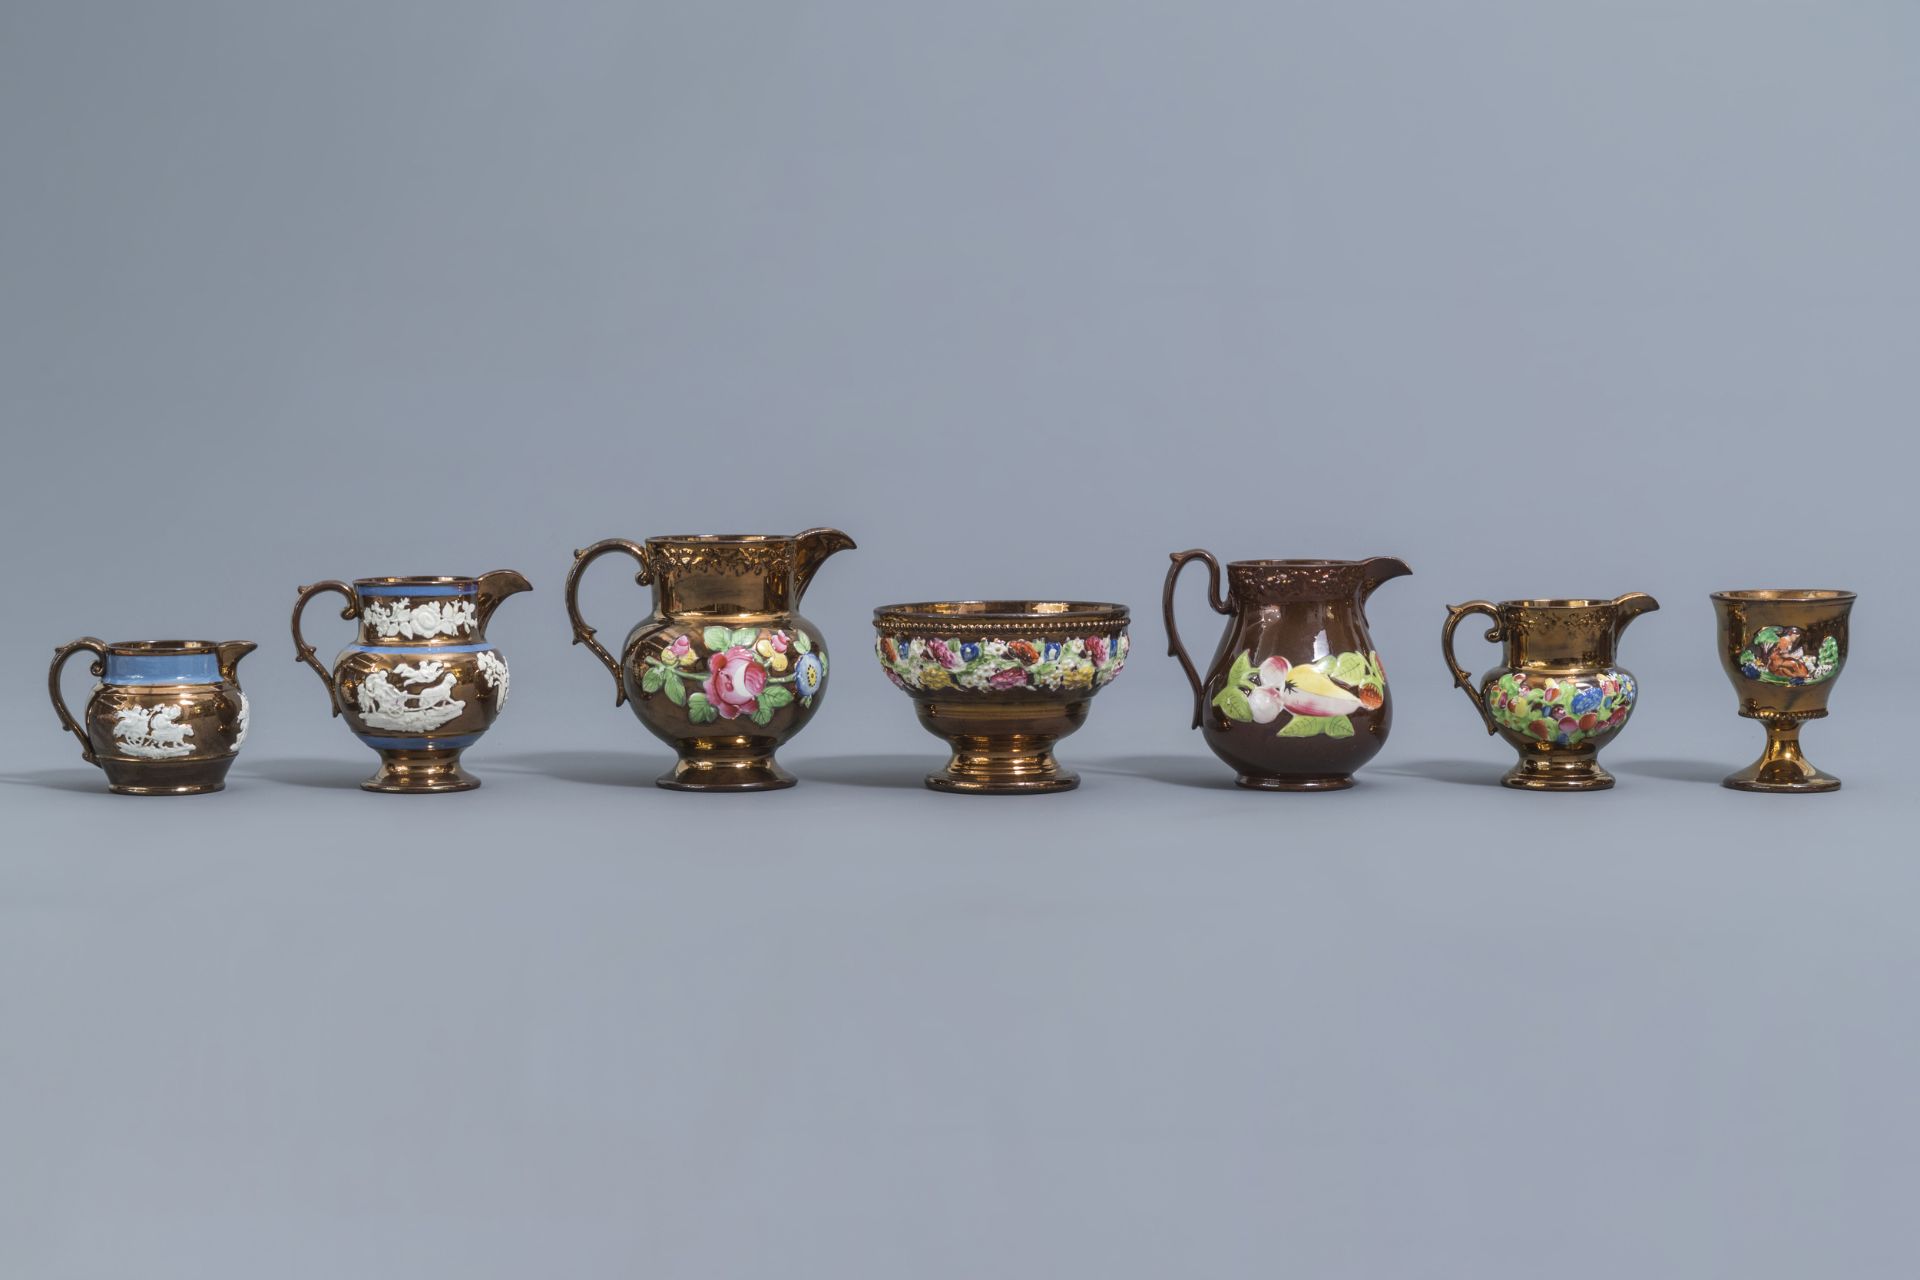 A varied collection of English lustreware items with relief design, 19th C. - Image 3 of 50